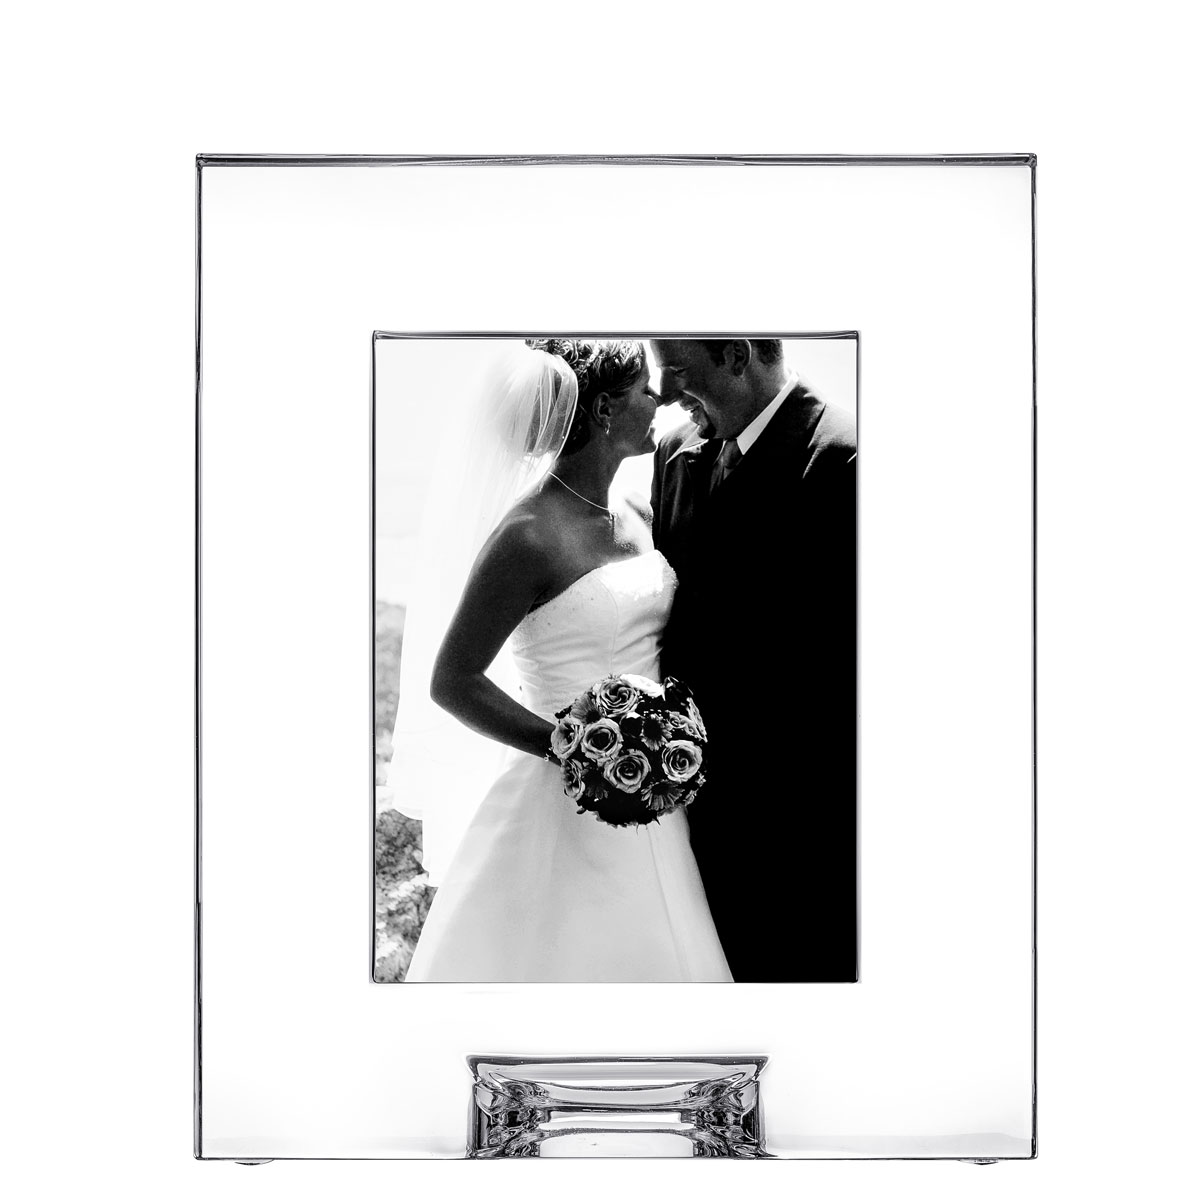 Orrefors Crystal, Plaza 5x7" Picture Frame